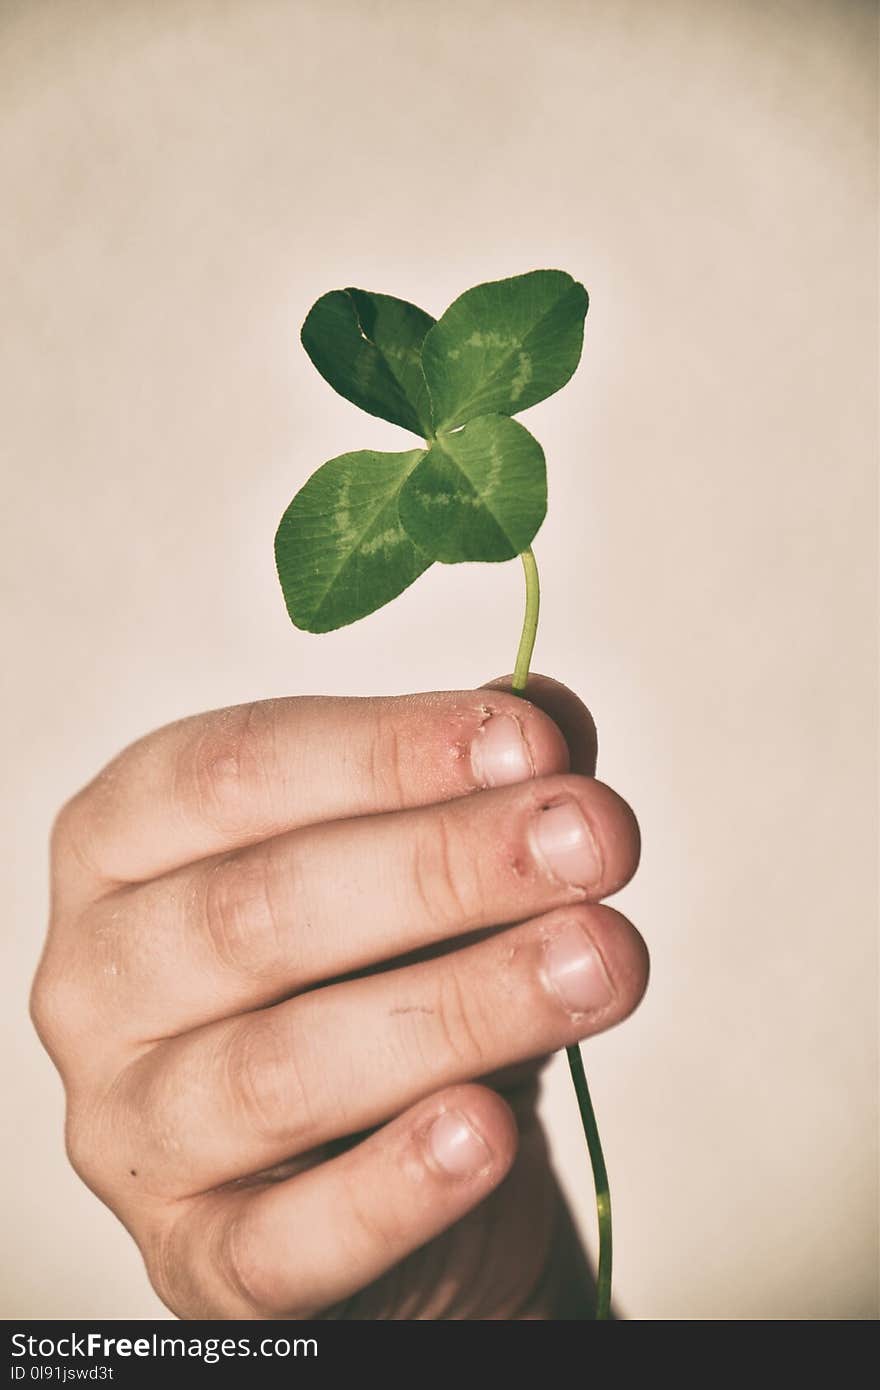 A small child`s hand holding a four-leaf clover on his fingers on a smooth background